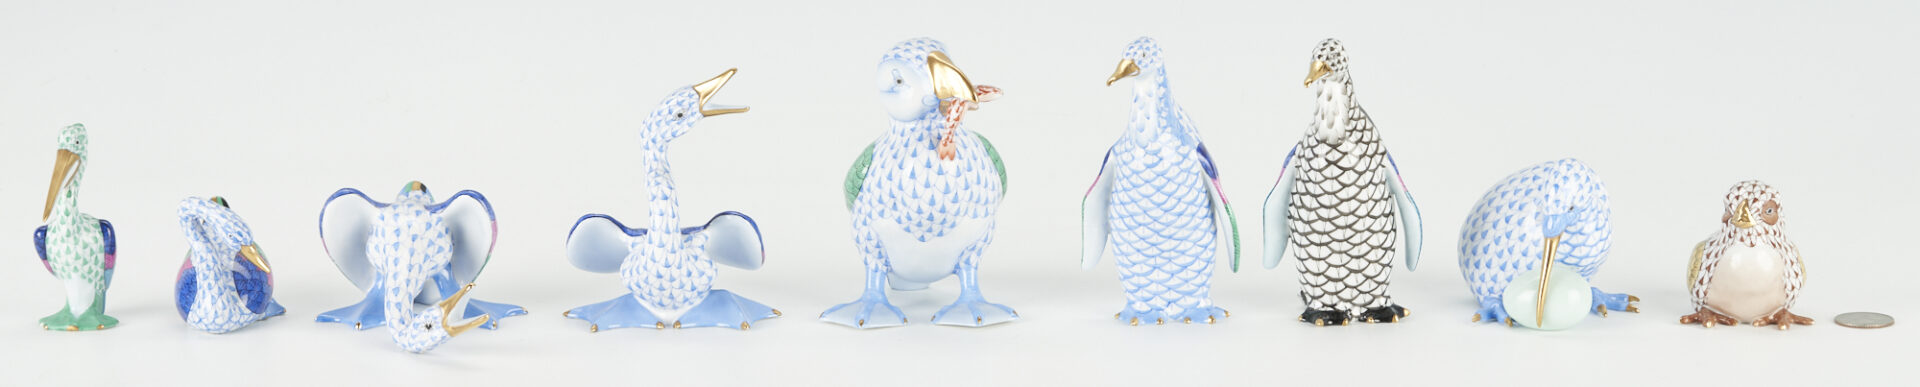 Lot 737: 9 Herend Porcelain Bird Figurines, incl. Puffin & Penguins